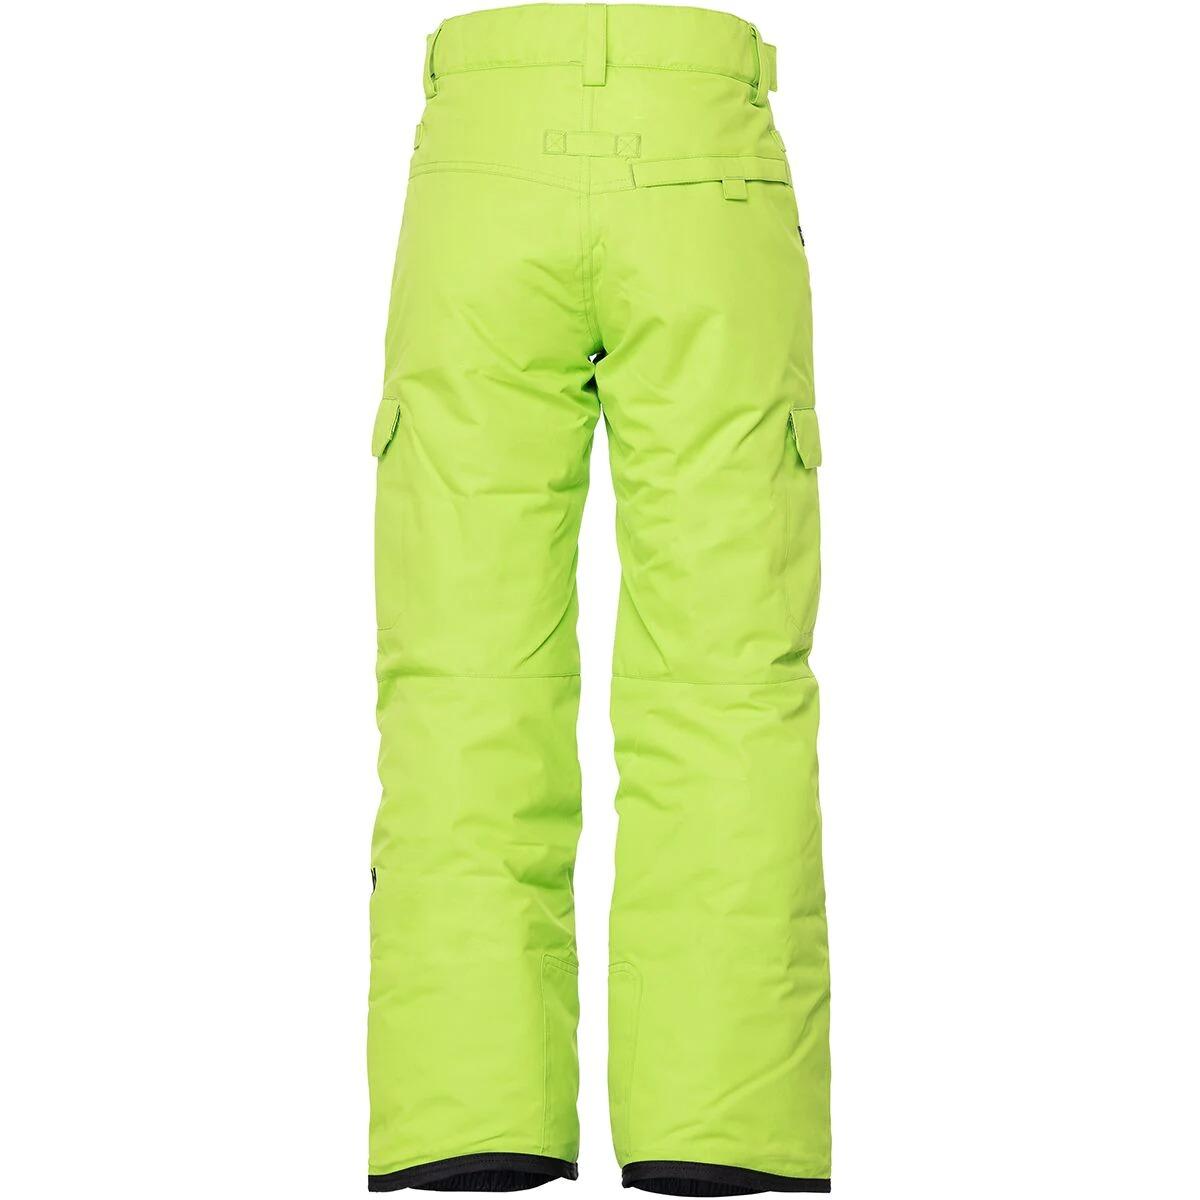 686 Infinity Cargo Insulated Pant - Boys'